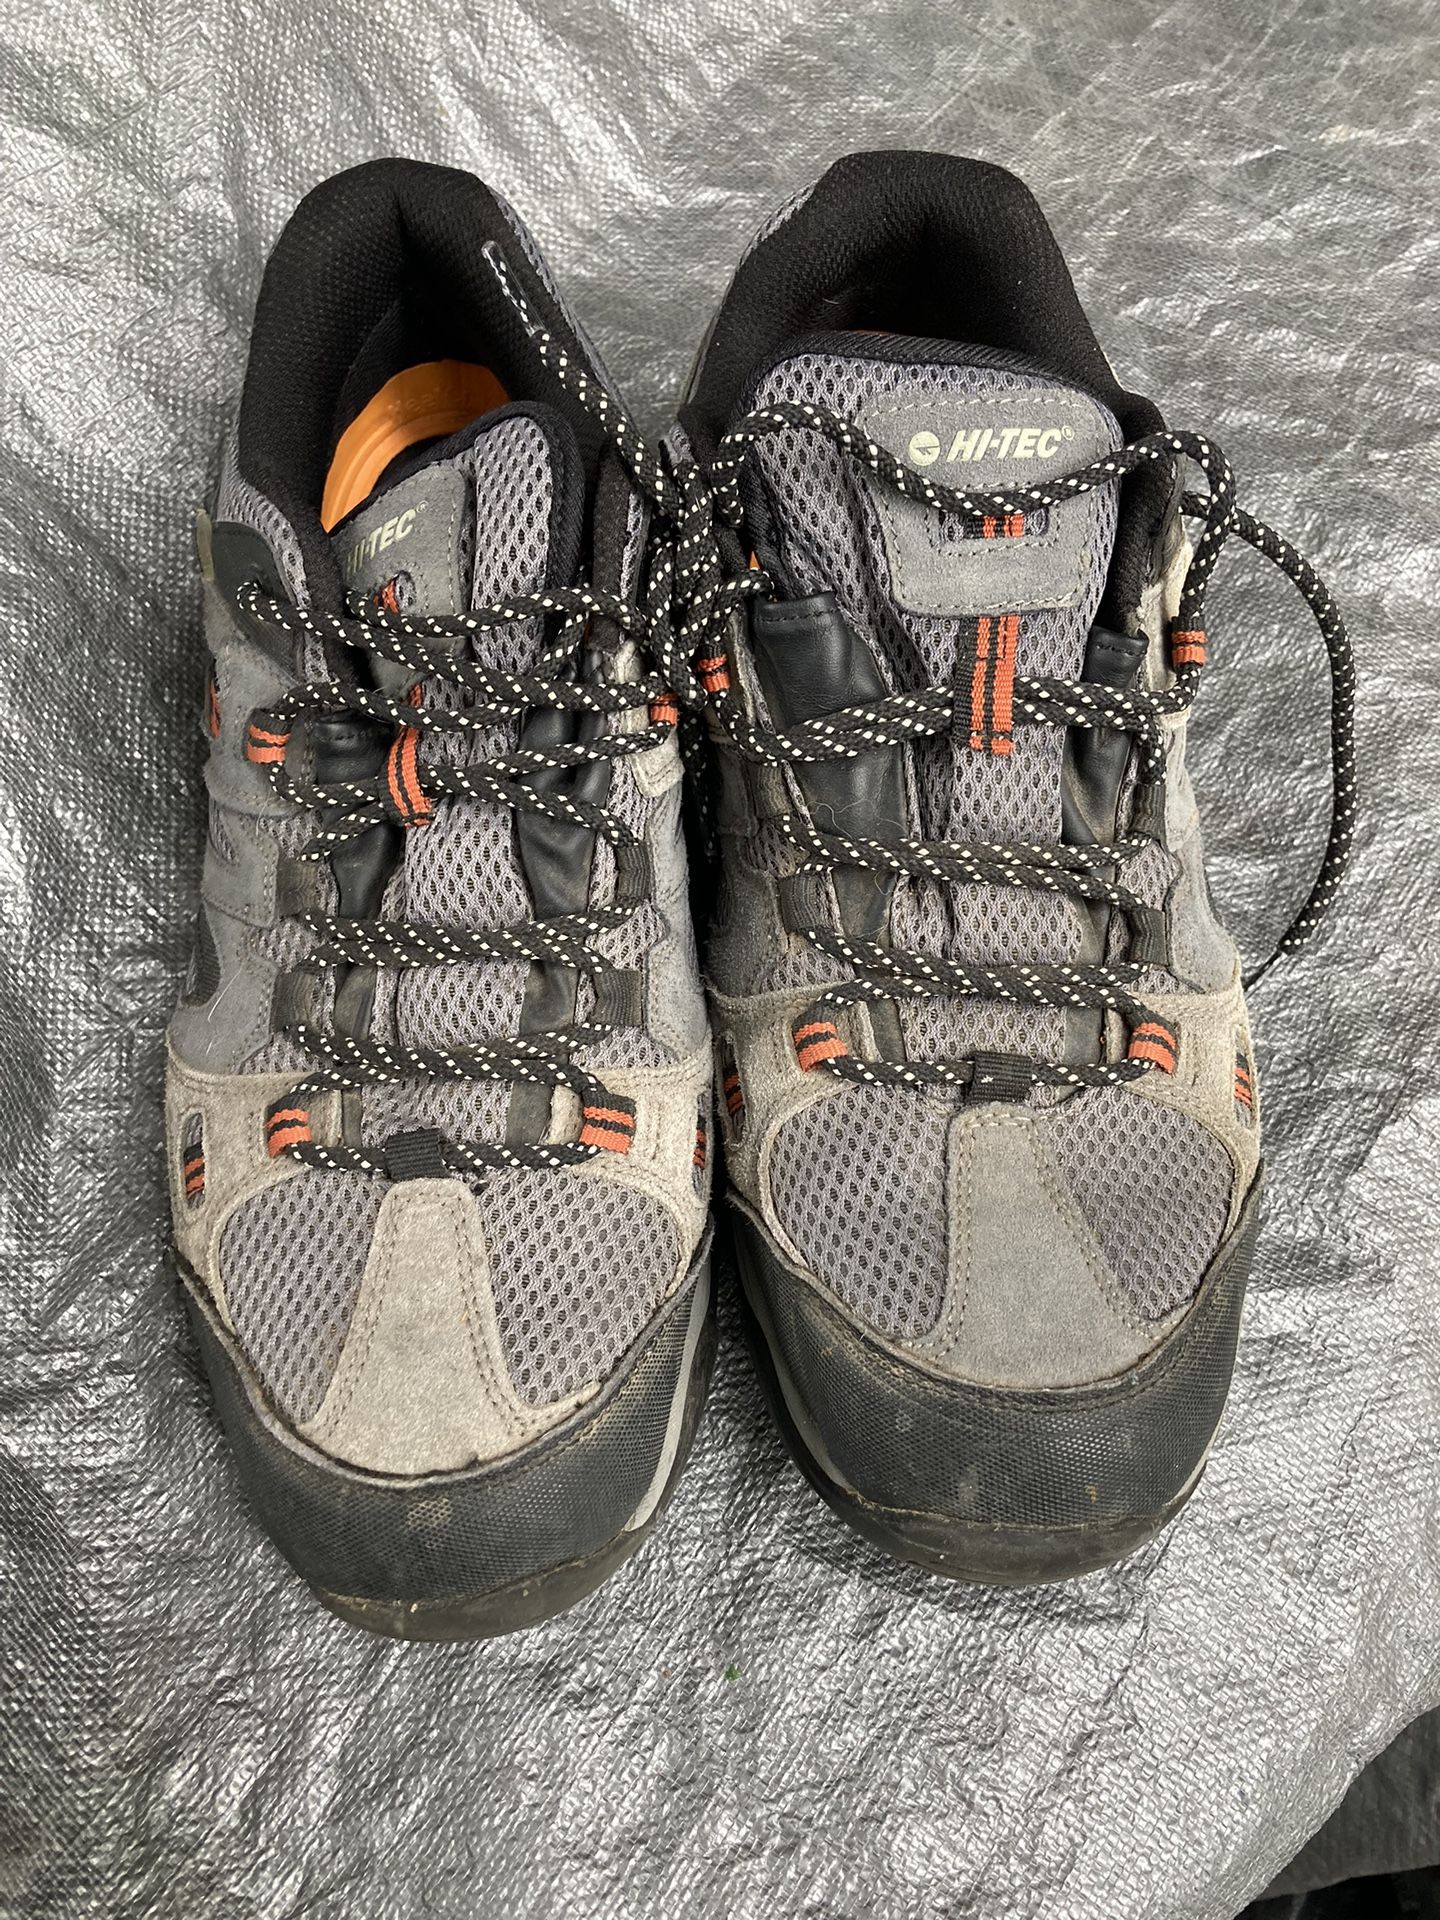 Size 12 work boots or hiking boots